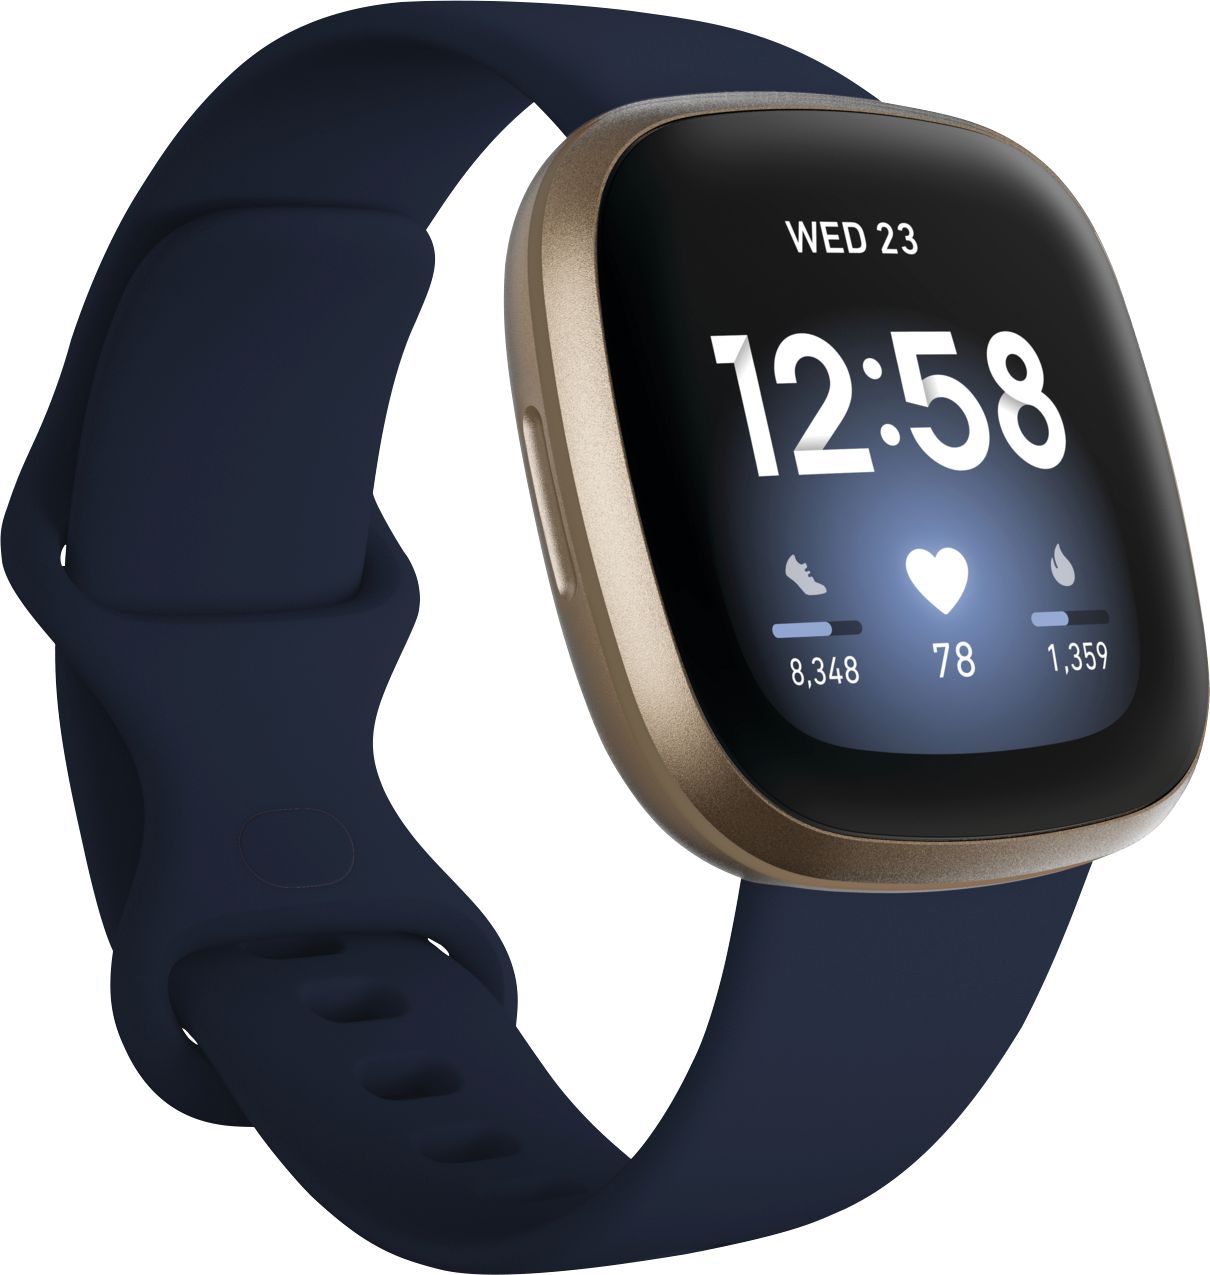 Angle View: Fitbit - Versa 3 Health & Fitness Smartwatch - Soft Gold